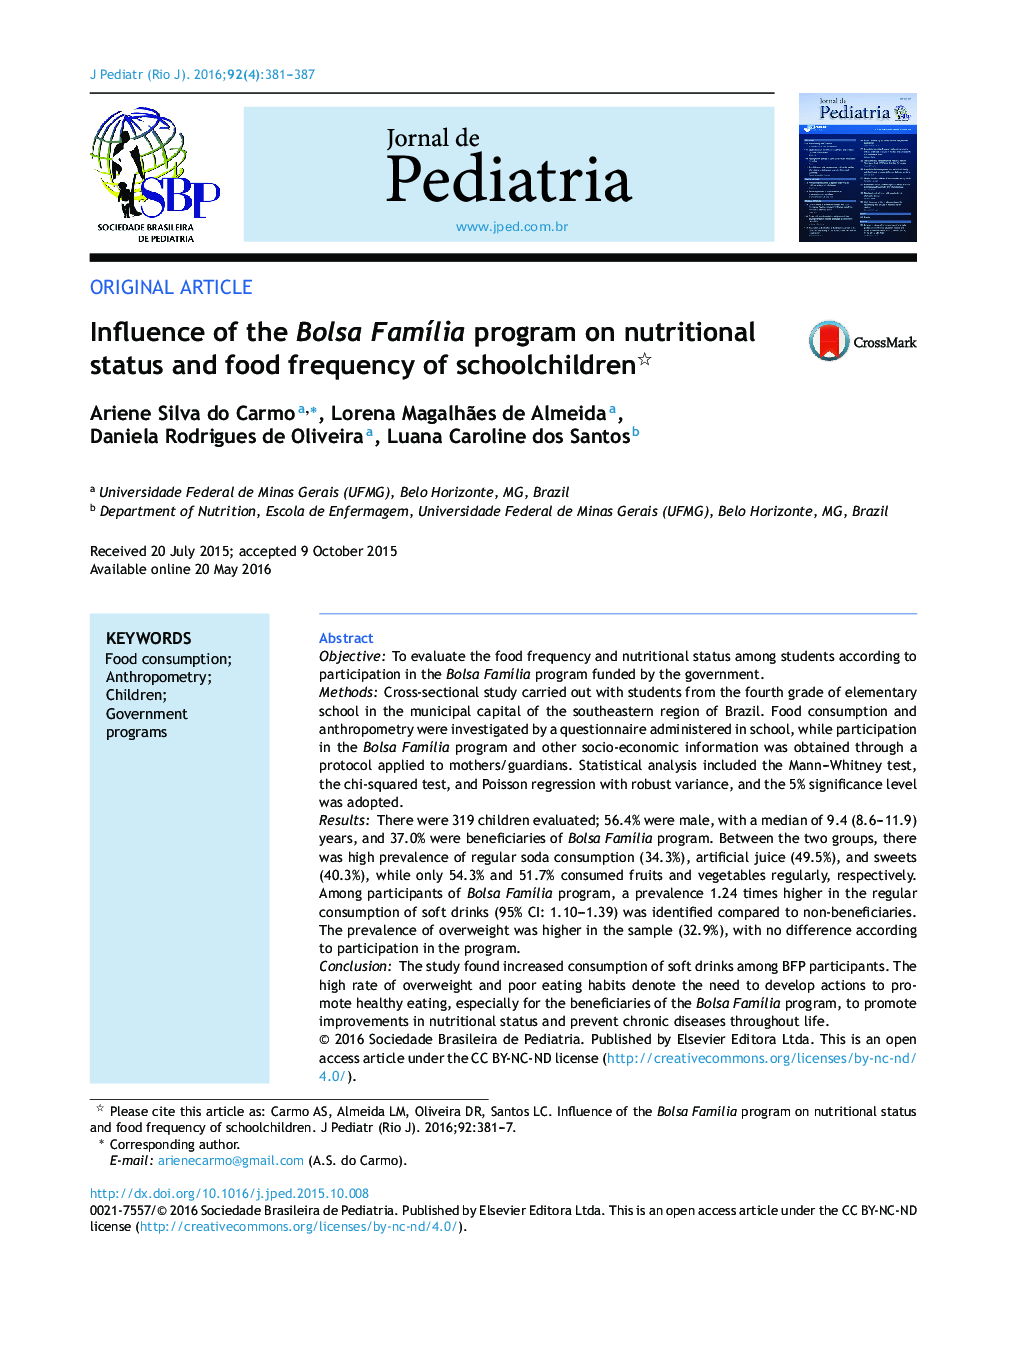 Influence of the Bolsa Família program on nutritional status and food frequency of schoolchildren 